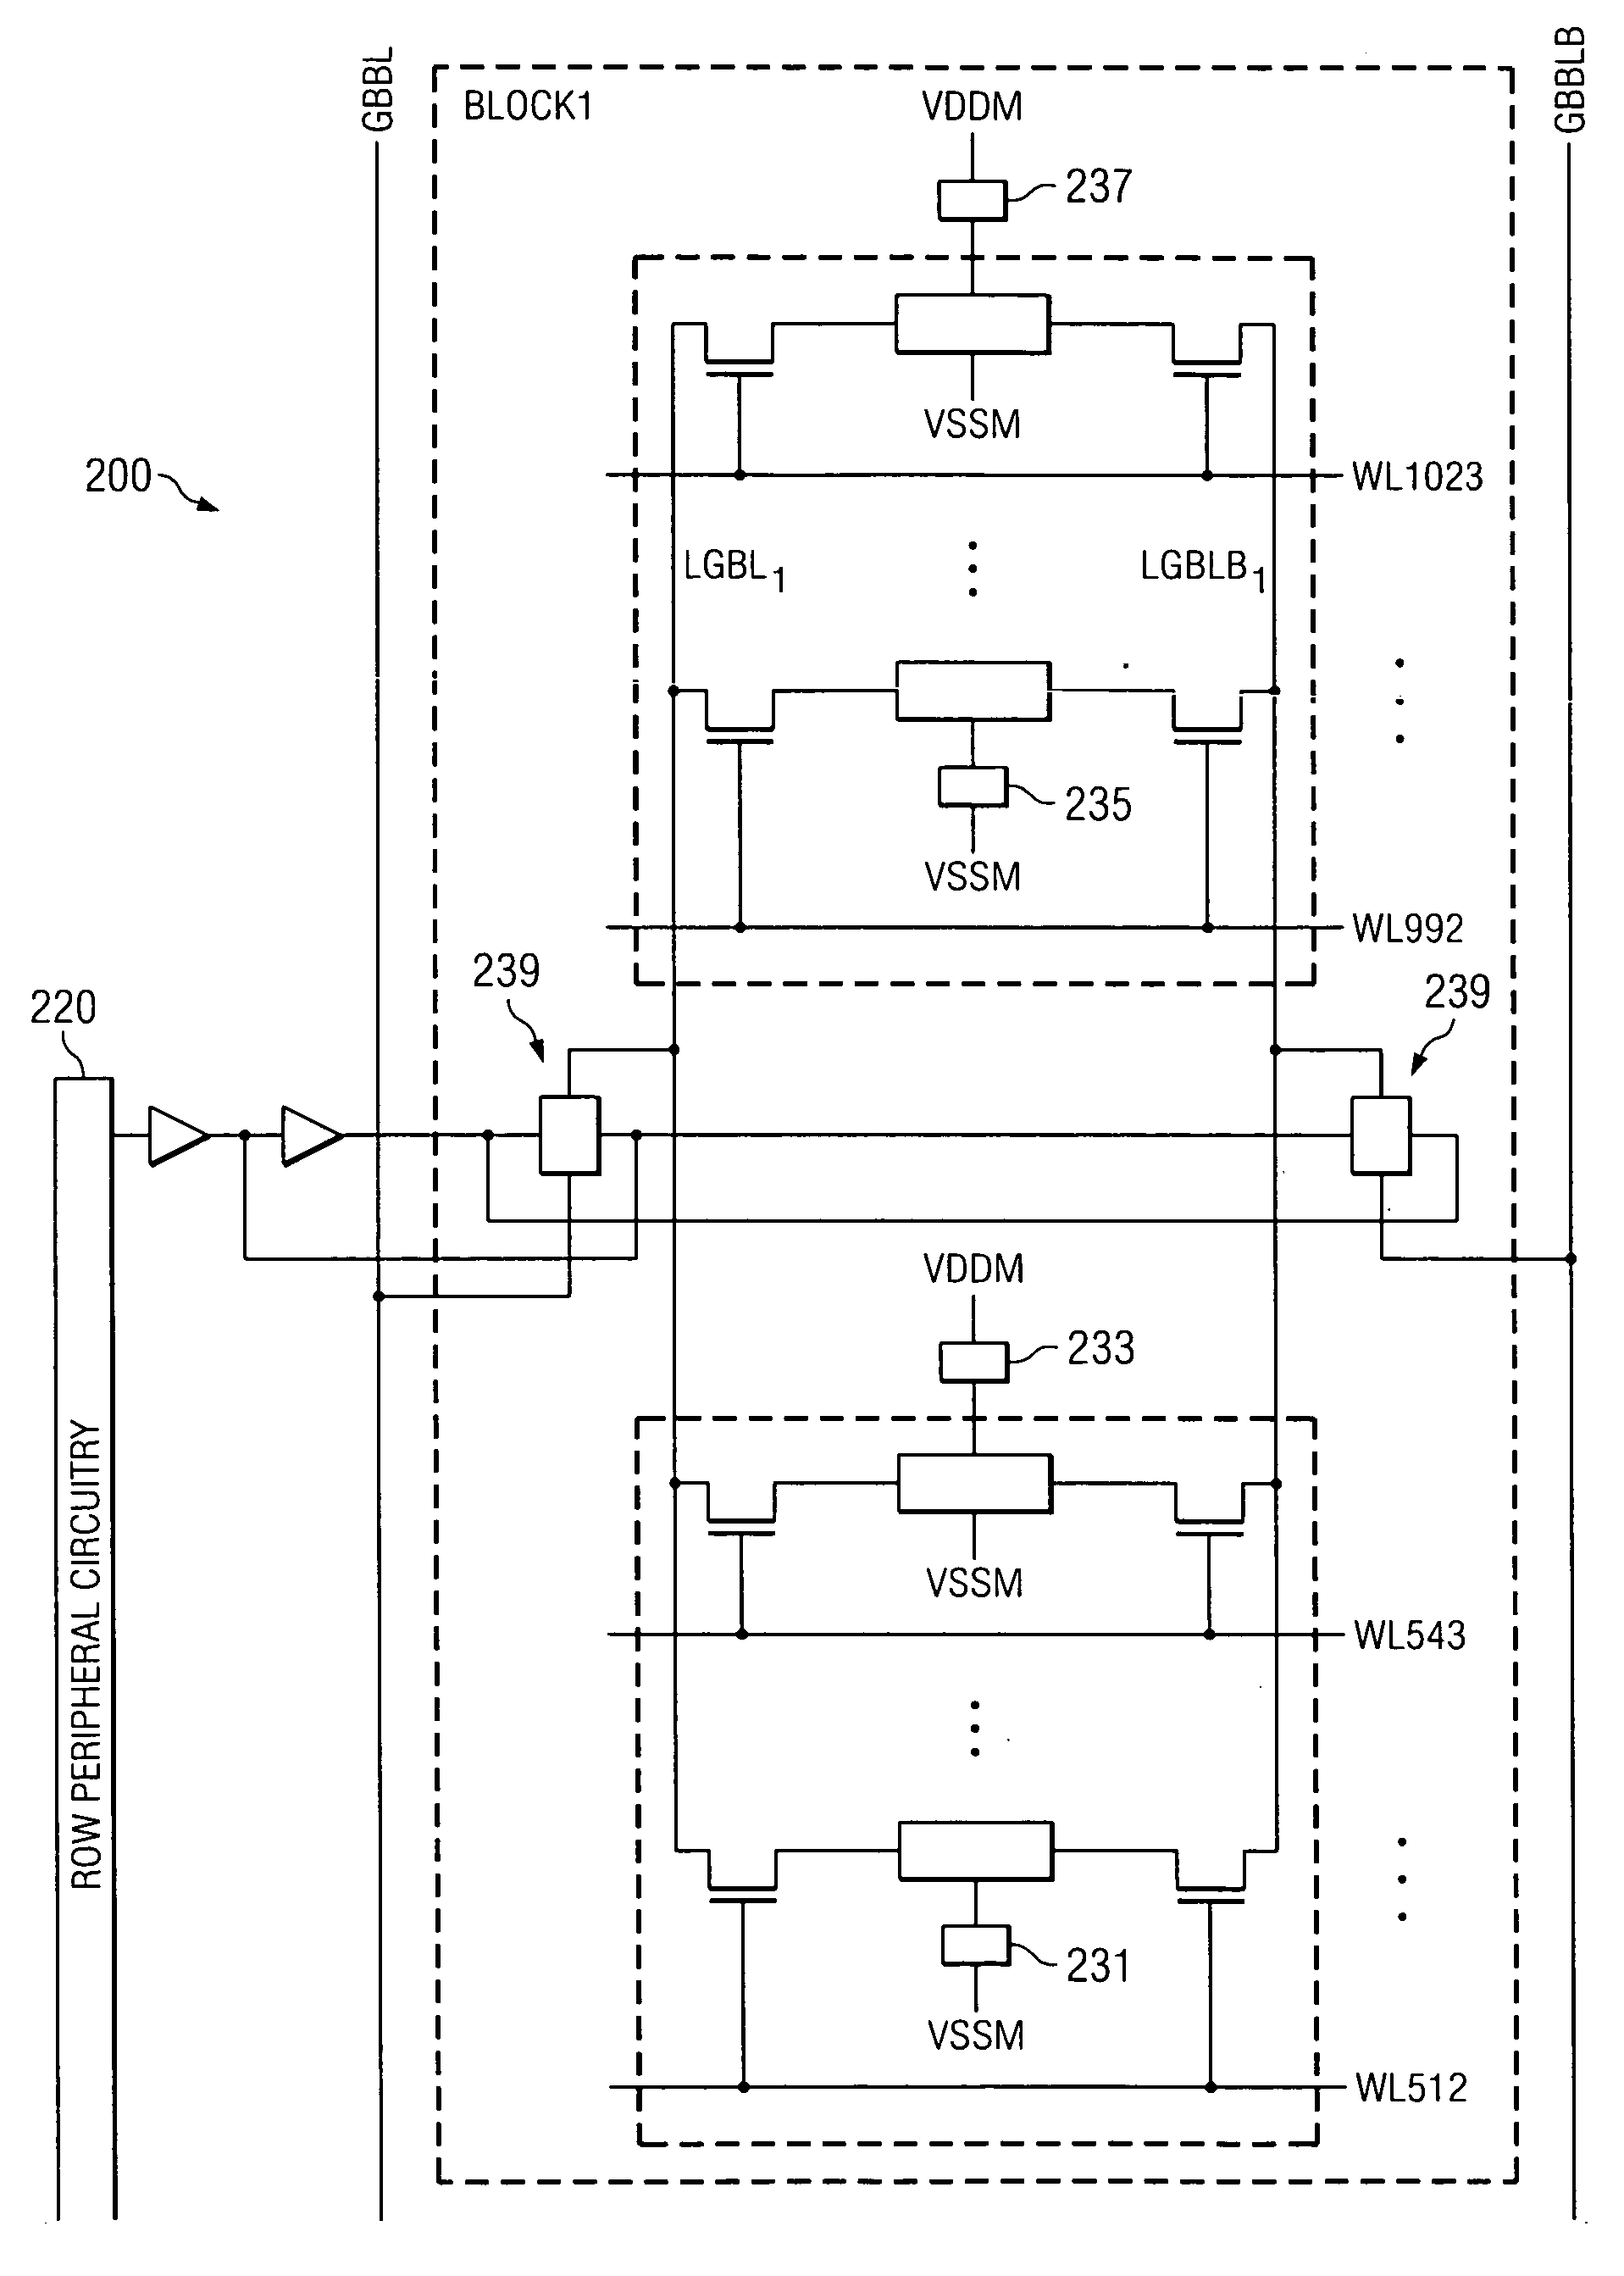 High performance, low leakage SRAM device and a method of placing a portion of memory cells of an SRAM device in an active mode